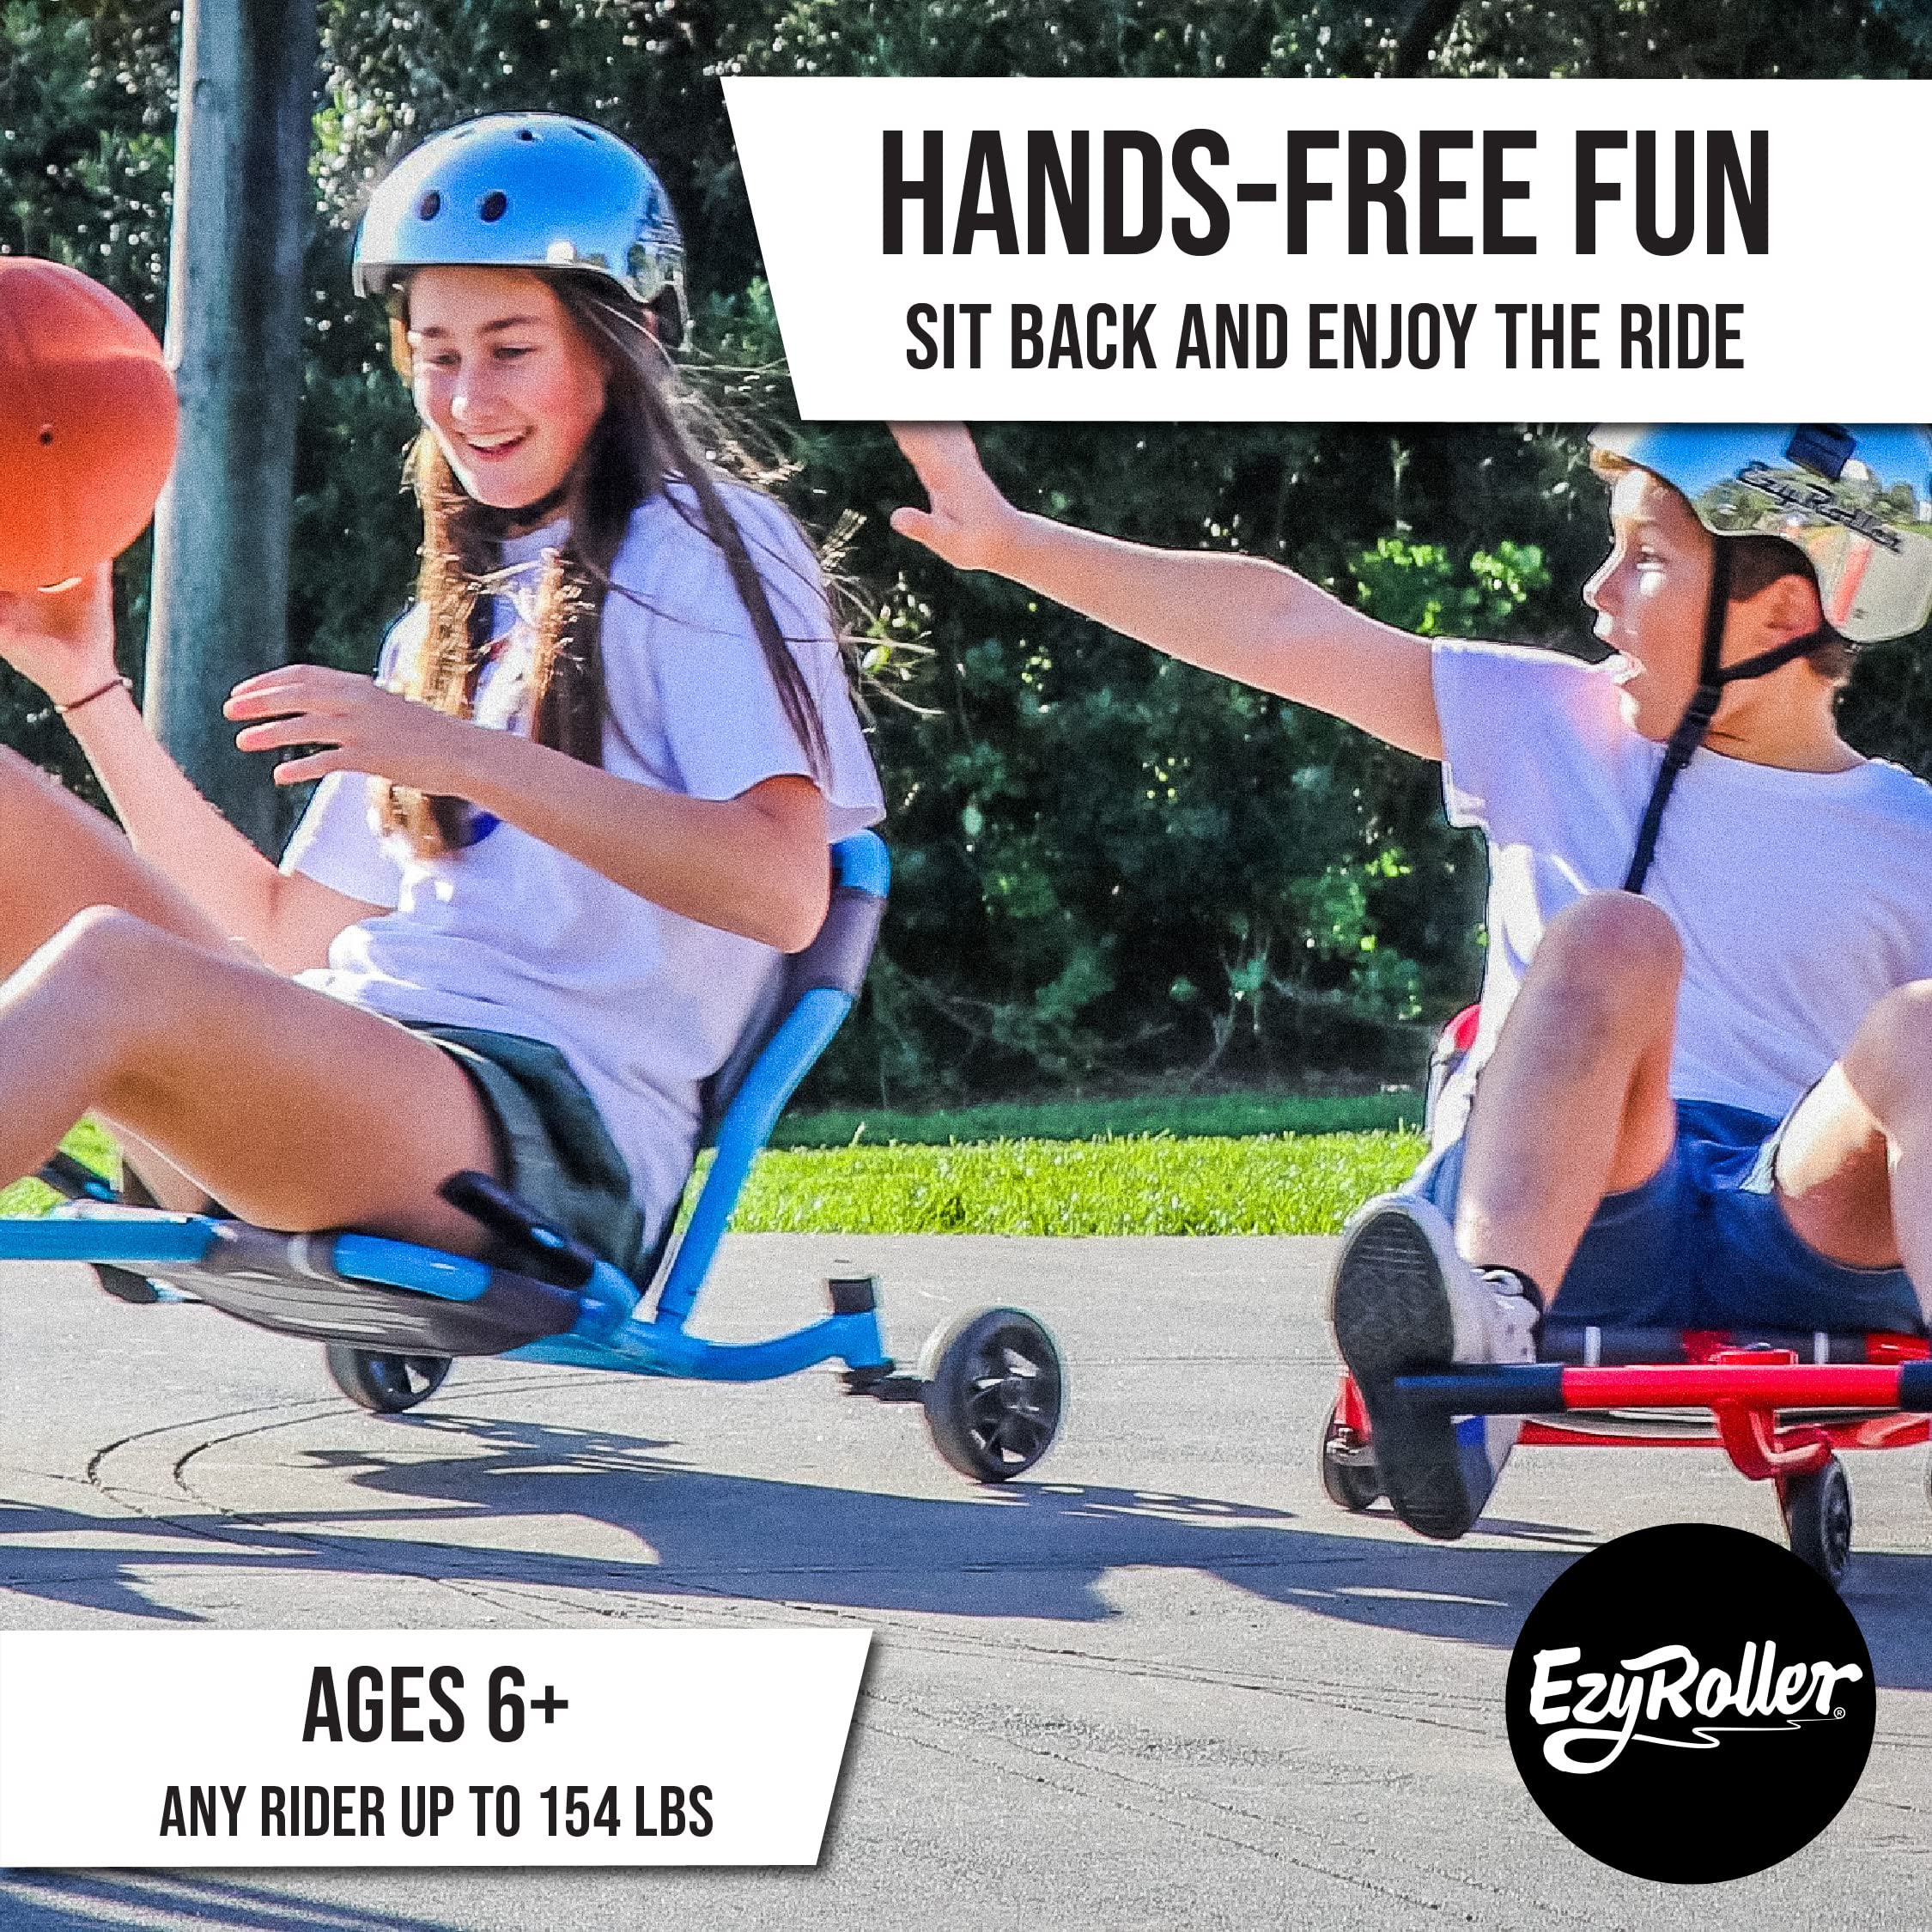 EzyRoller New Drifter-X Ride on Toy for Ages 6 and Older, Up to 150lbs. - Black